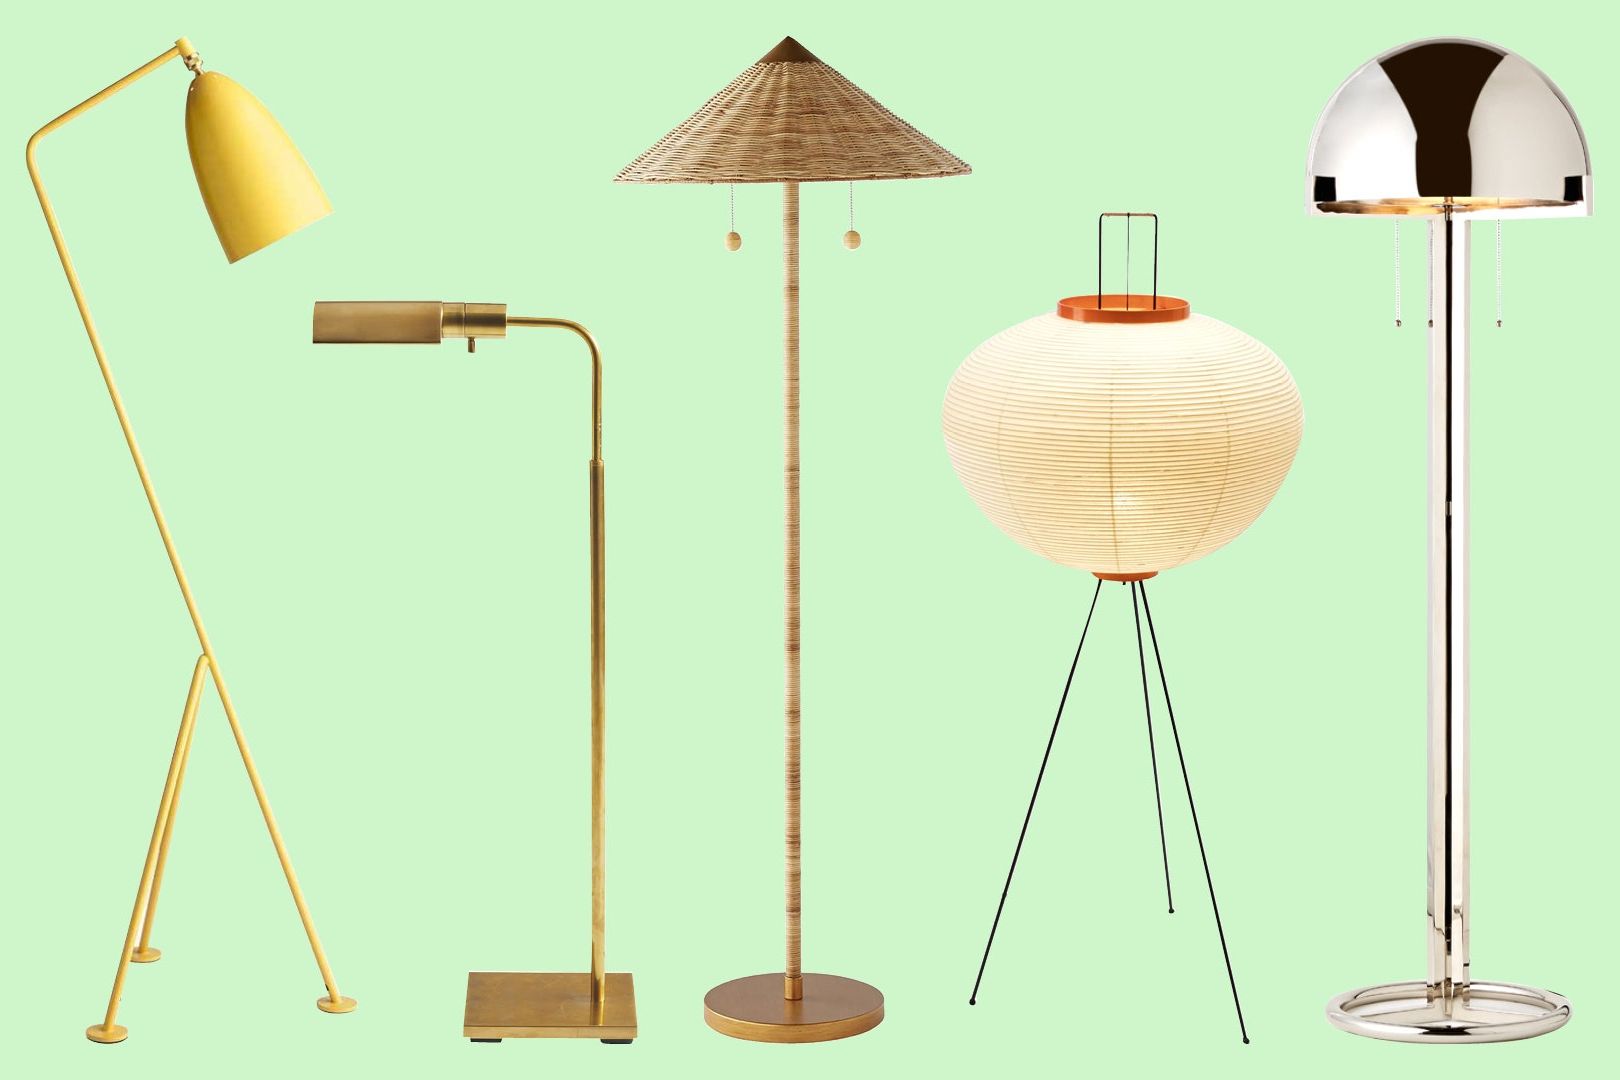 30 Affordable Floor Lamps To Brighten Your Space | Architectural Digest Regarding Lantern Floor Lamps (View 14 of 20)